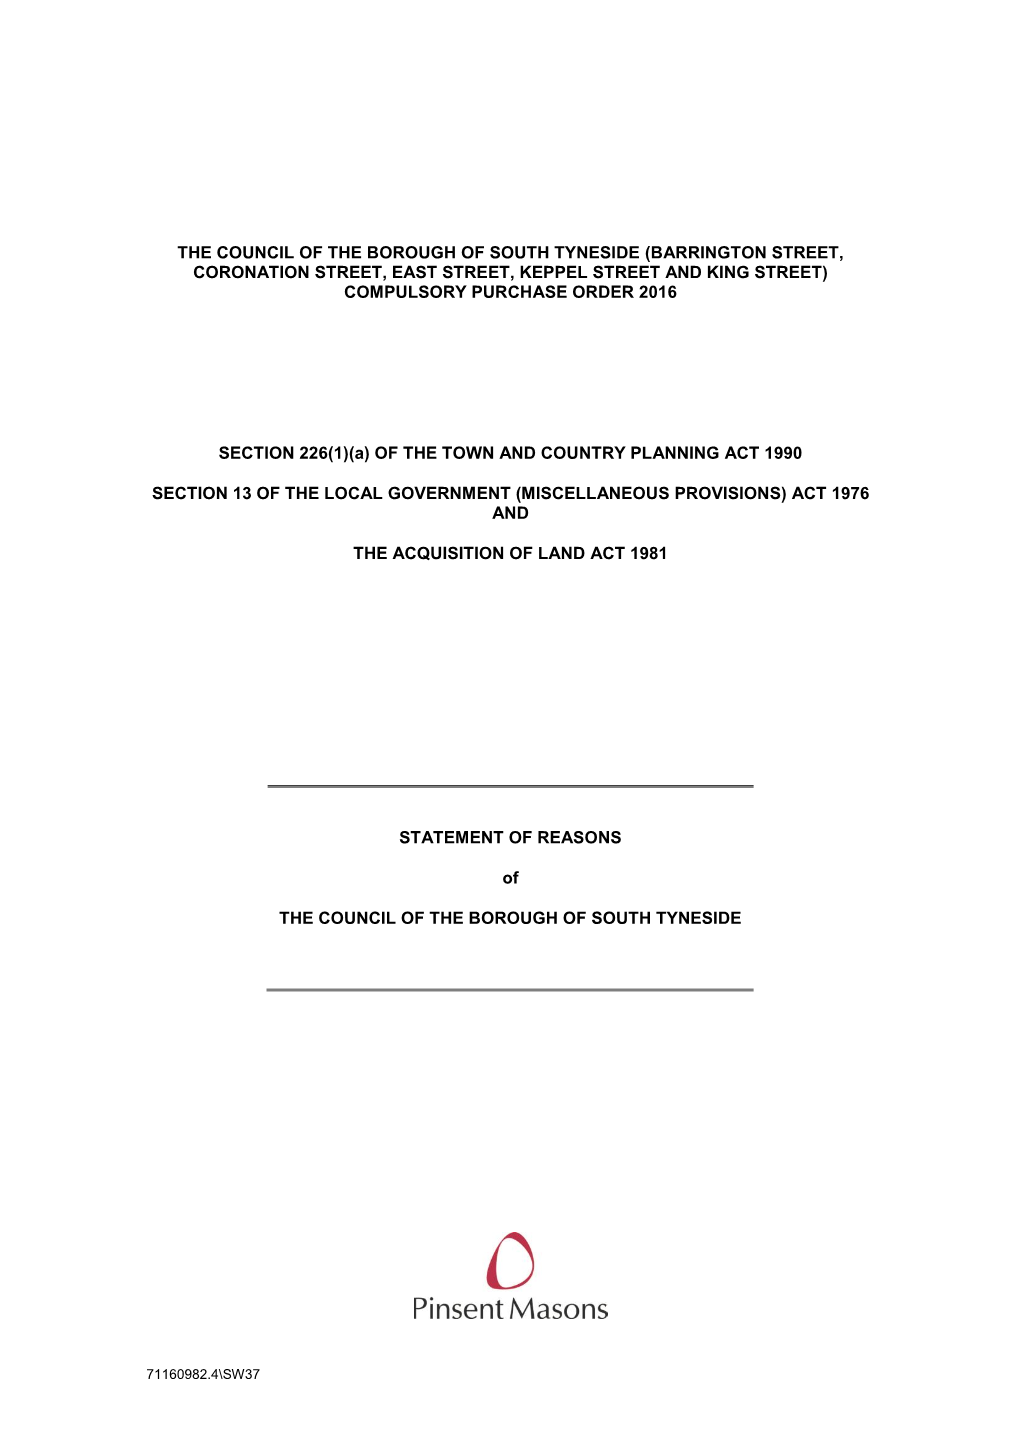 The Council of the Borough of South Tyneside (Barrington Street, Coronation Street, East Street, Keppel Street and King Street) Compulsory Purchase Order 2016